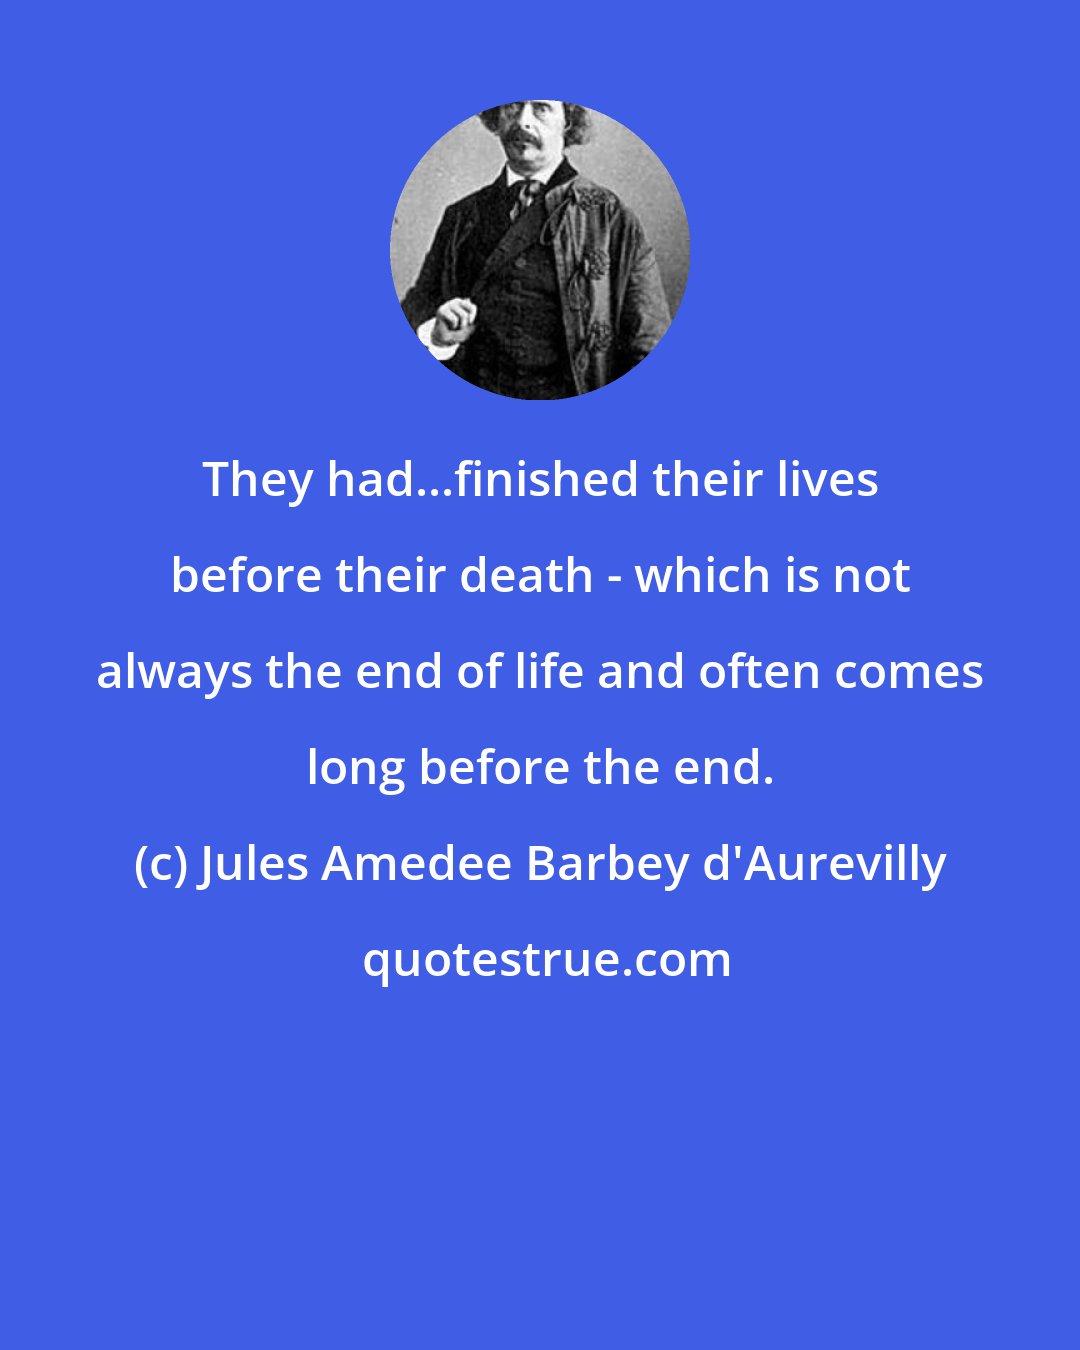 Jules Amedee Barbey d'Aurevilly: They had...finished their lives before their death - which is not always the end of life and often comes long before the end.